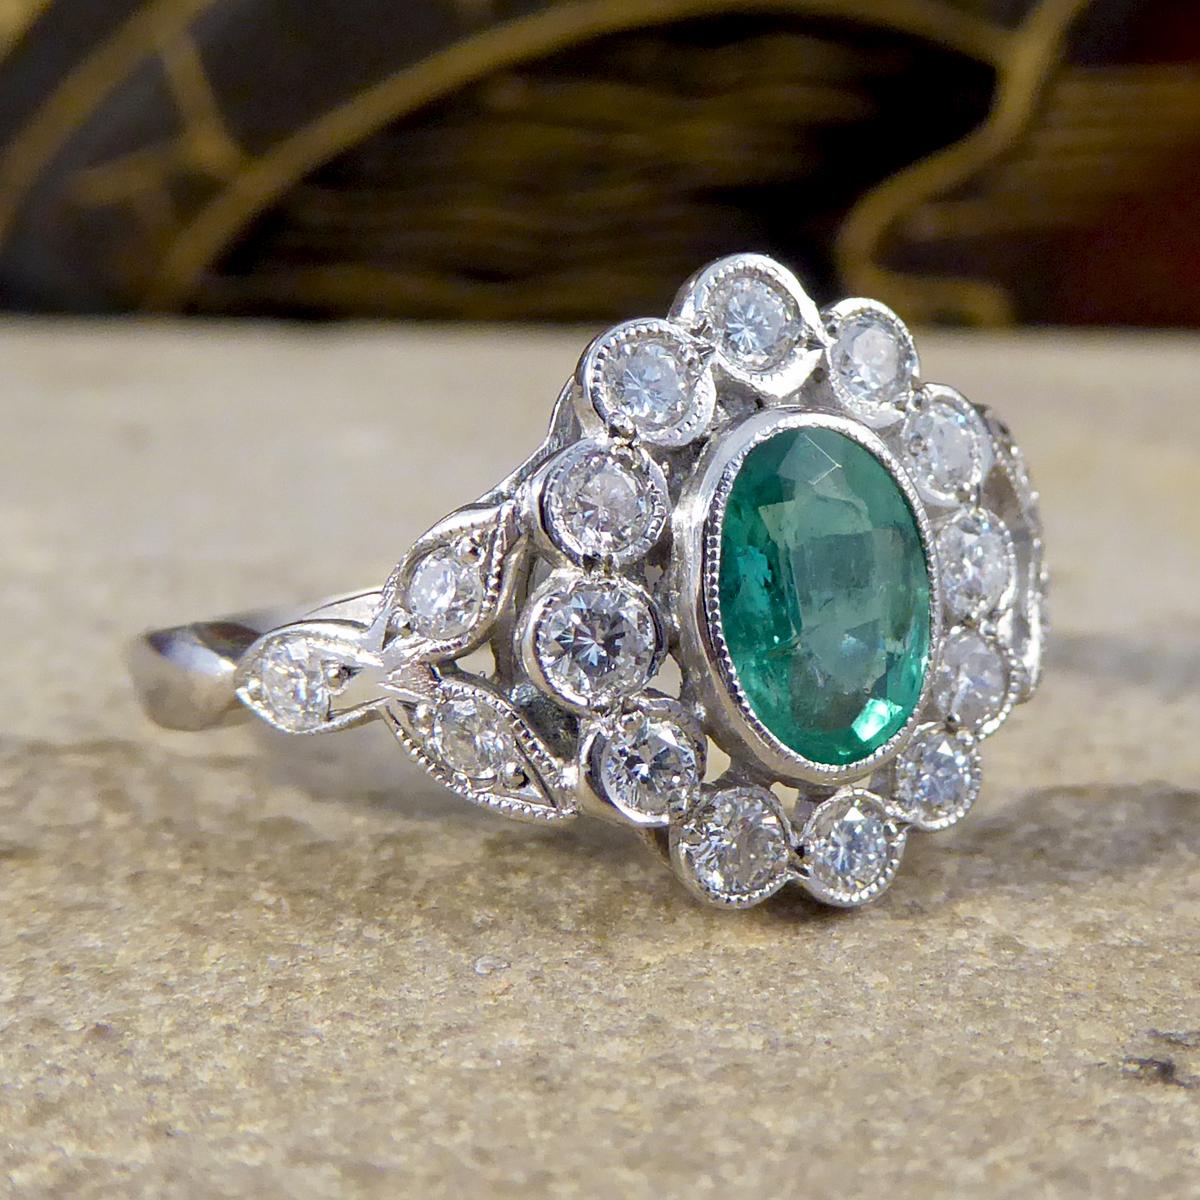 This lovely contemporary Emerald and Diamond ring has been crafted with a 0.75ct mesmerising green Emerald centre, surrounded by 12 modern brilliant cut Diamonds. Using larger Diamonds in this cluster ring allows there to be spacing between the